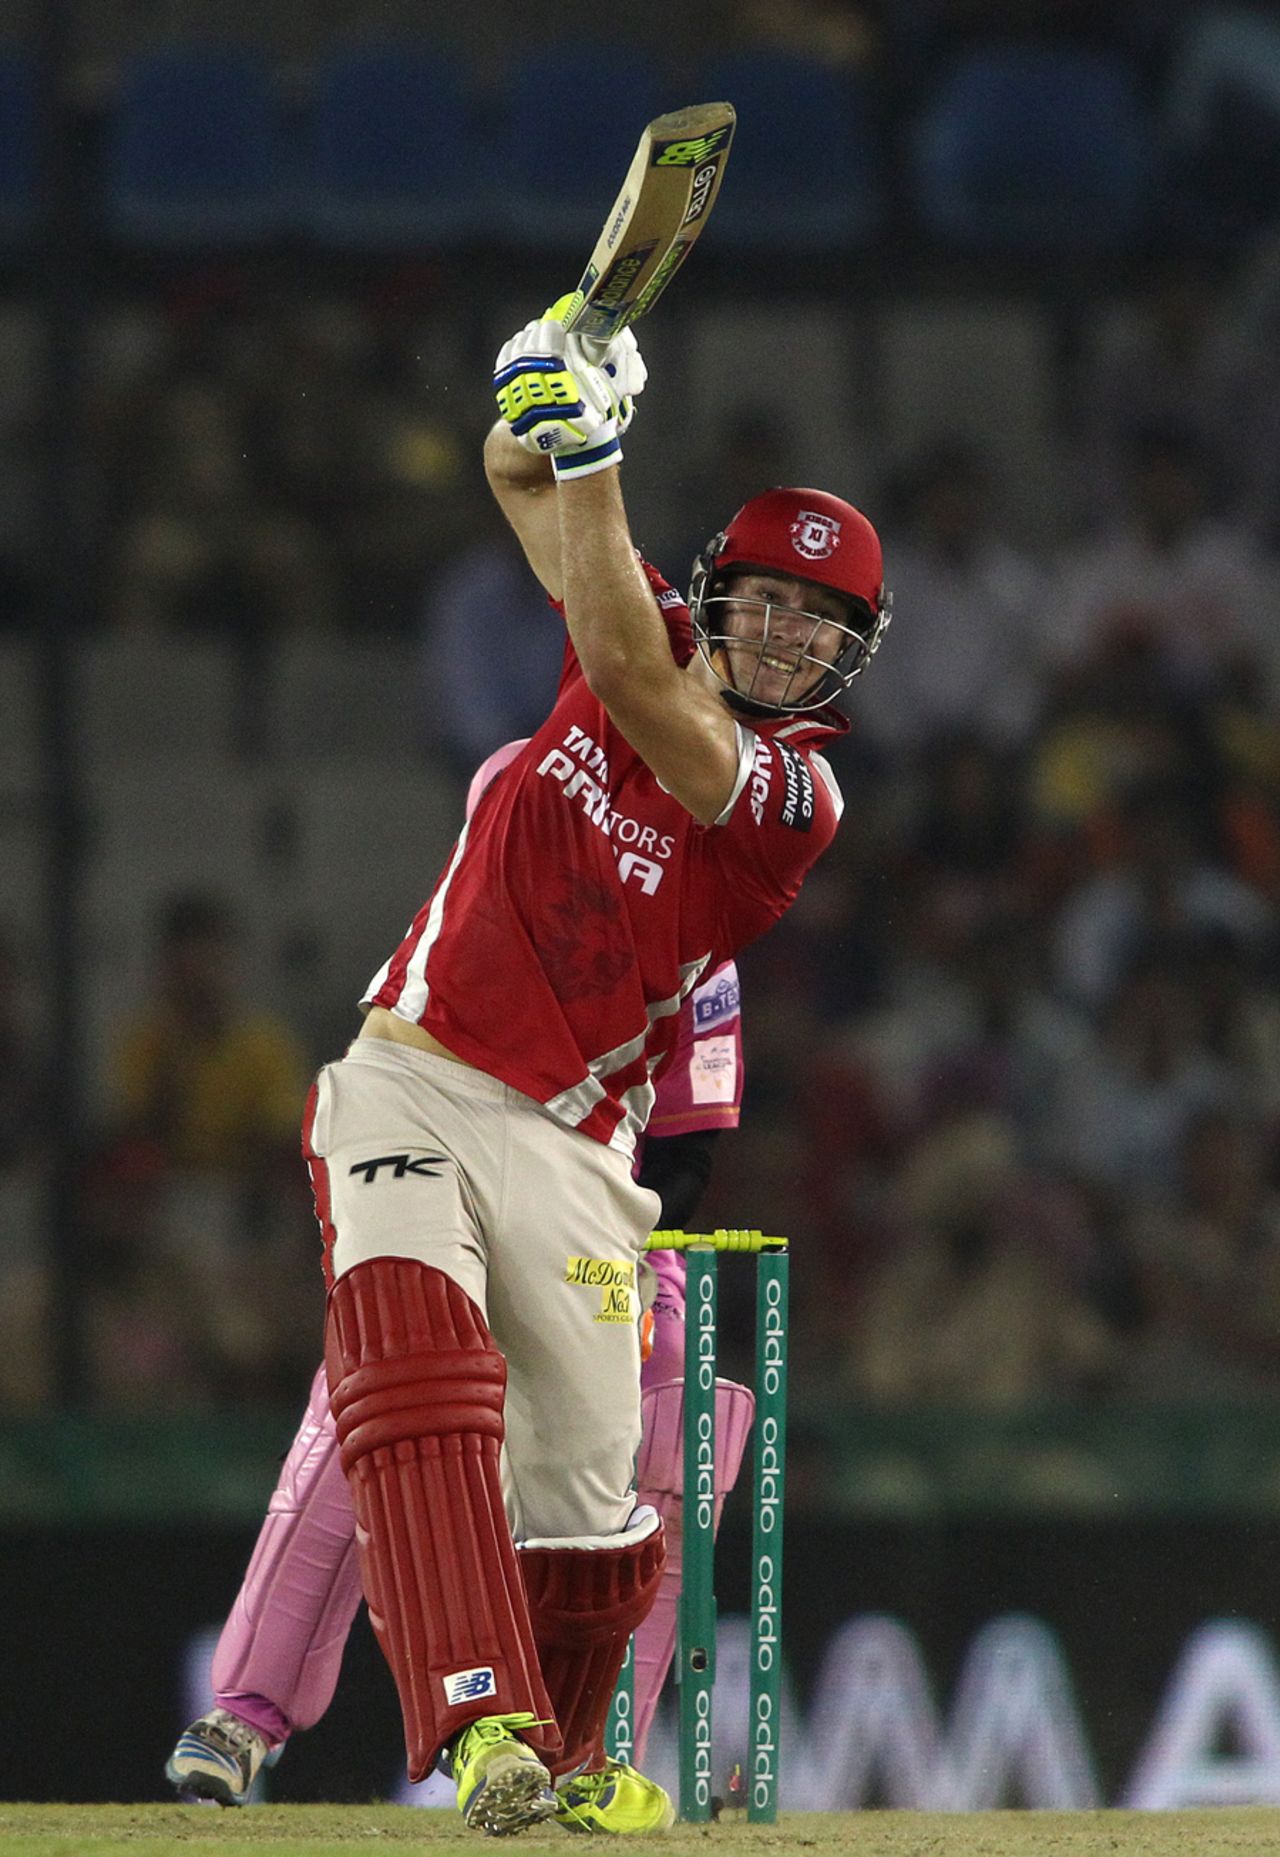 In typical fashion, David Miller strokes one down the ground, Kings XI Punjab v Northern Knights, Champions League T20, Mohali, September 26, 2014